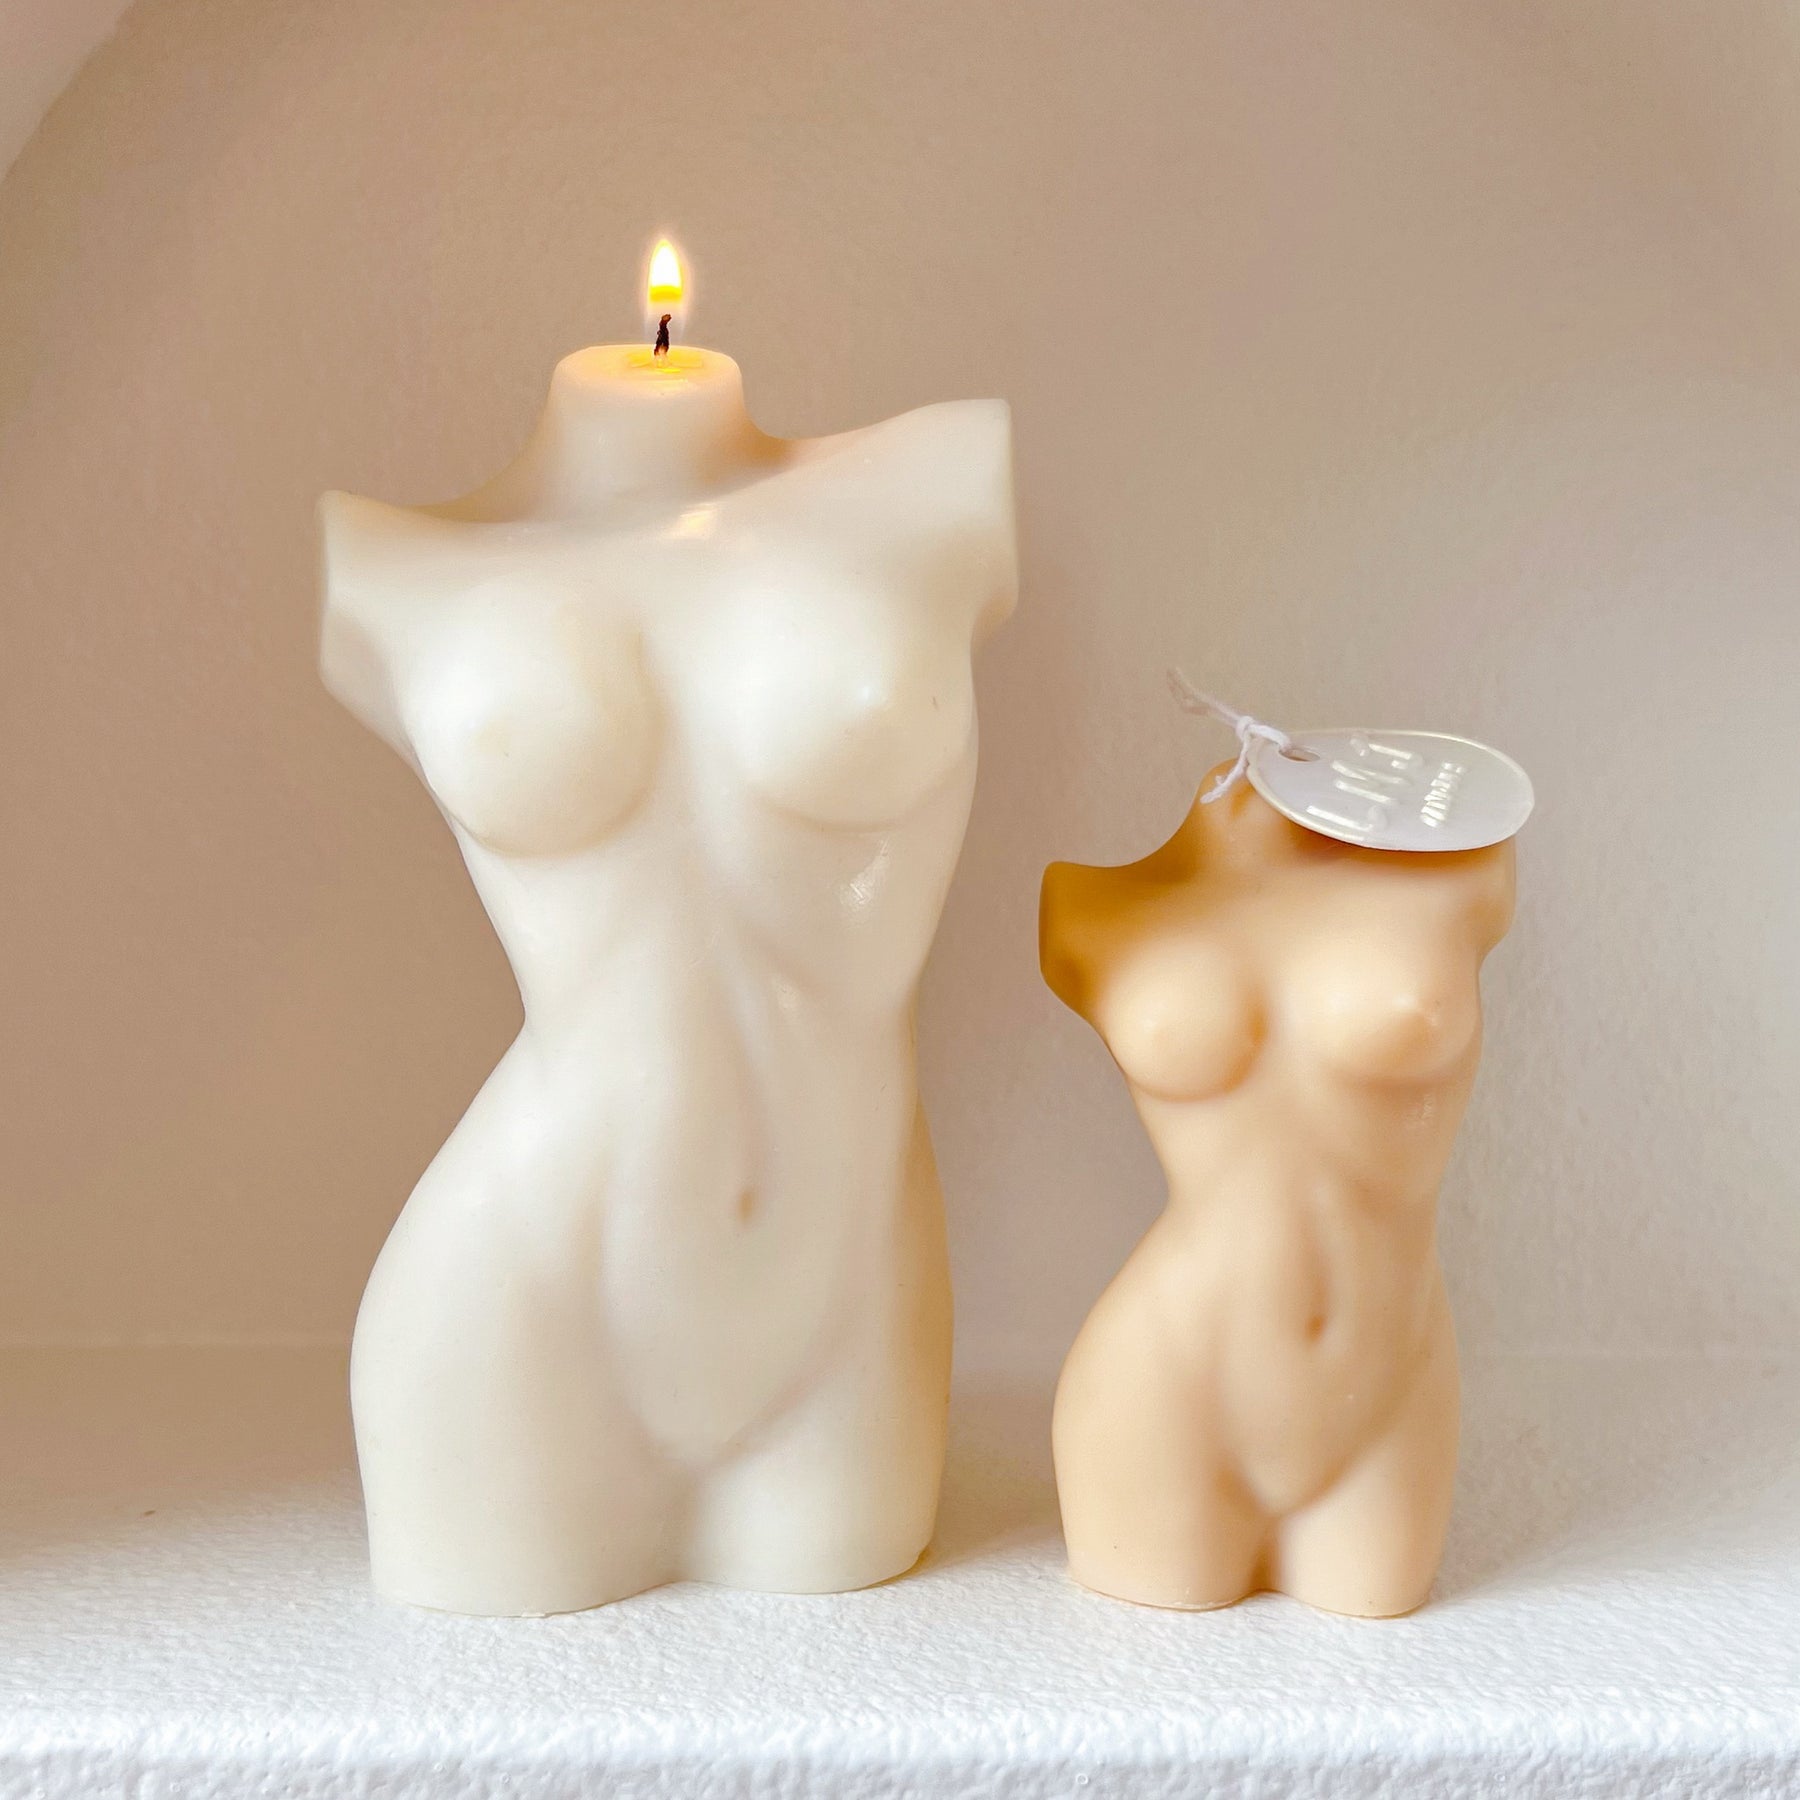 Female Torso Scented Soy Candle - Naked Body Candle | LMJ Candles